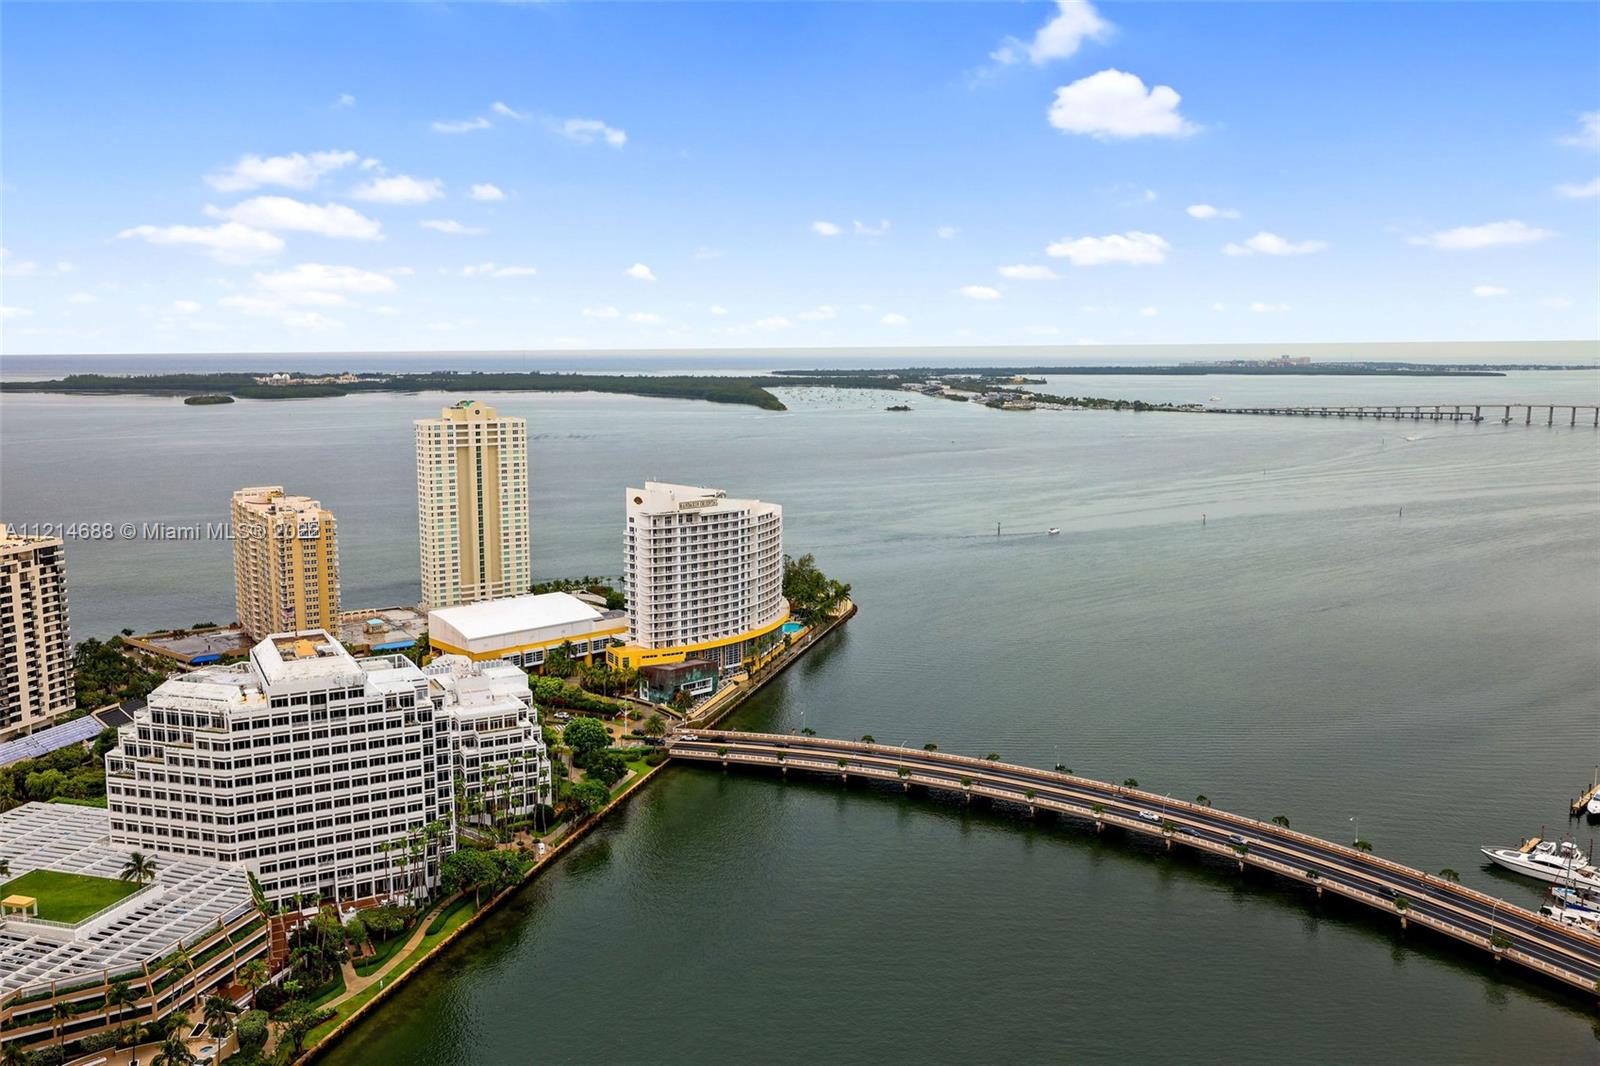 Must see, amazing views of the city, bay and park from this 2 bedroom + Den / 2 bathroom furnished condo. Master Bedroom has large closets and a huge bathroom with separate Shower and Tub. The large den makes a perfect office or separate seating area. Building has 5 star amenities with swimming pool, gym, spa... Located footsteps away from Brickell City Centre, Mary Brickell Village, with tons of great restaurants and shopping.